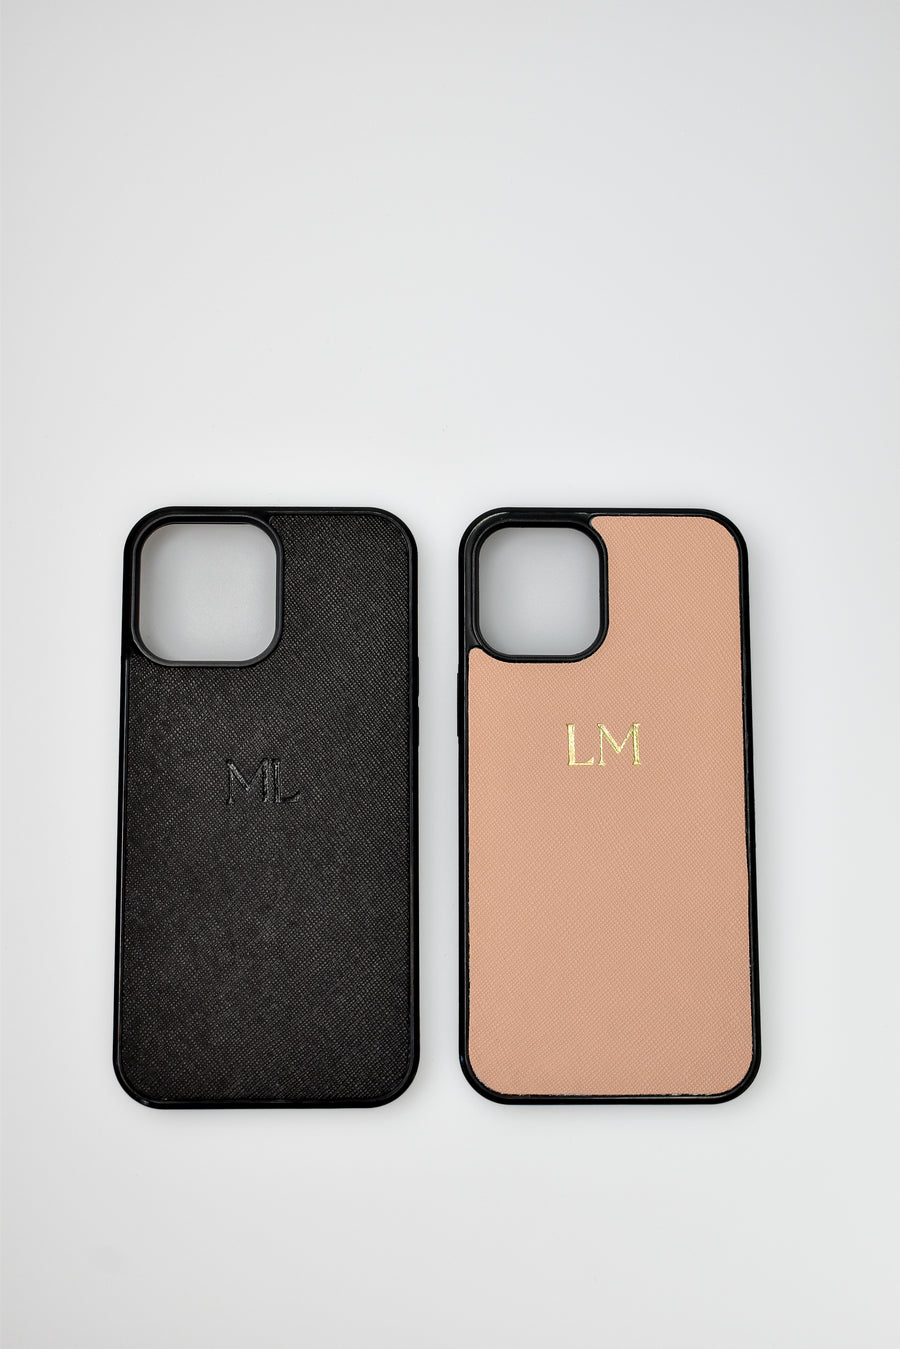 iPhone 11 Pro Max Personalised Leather Case - Black & Sandy Beige